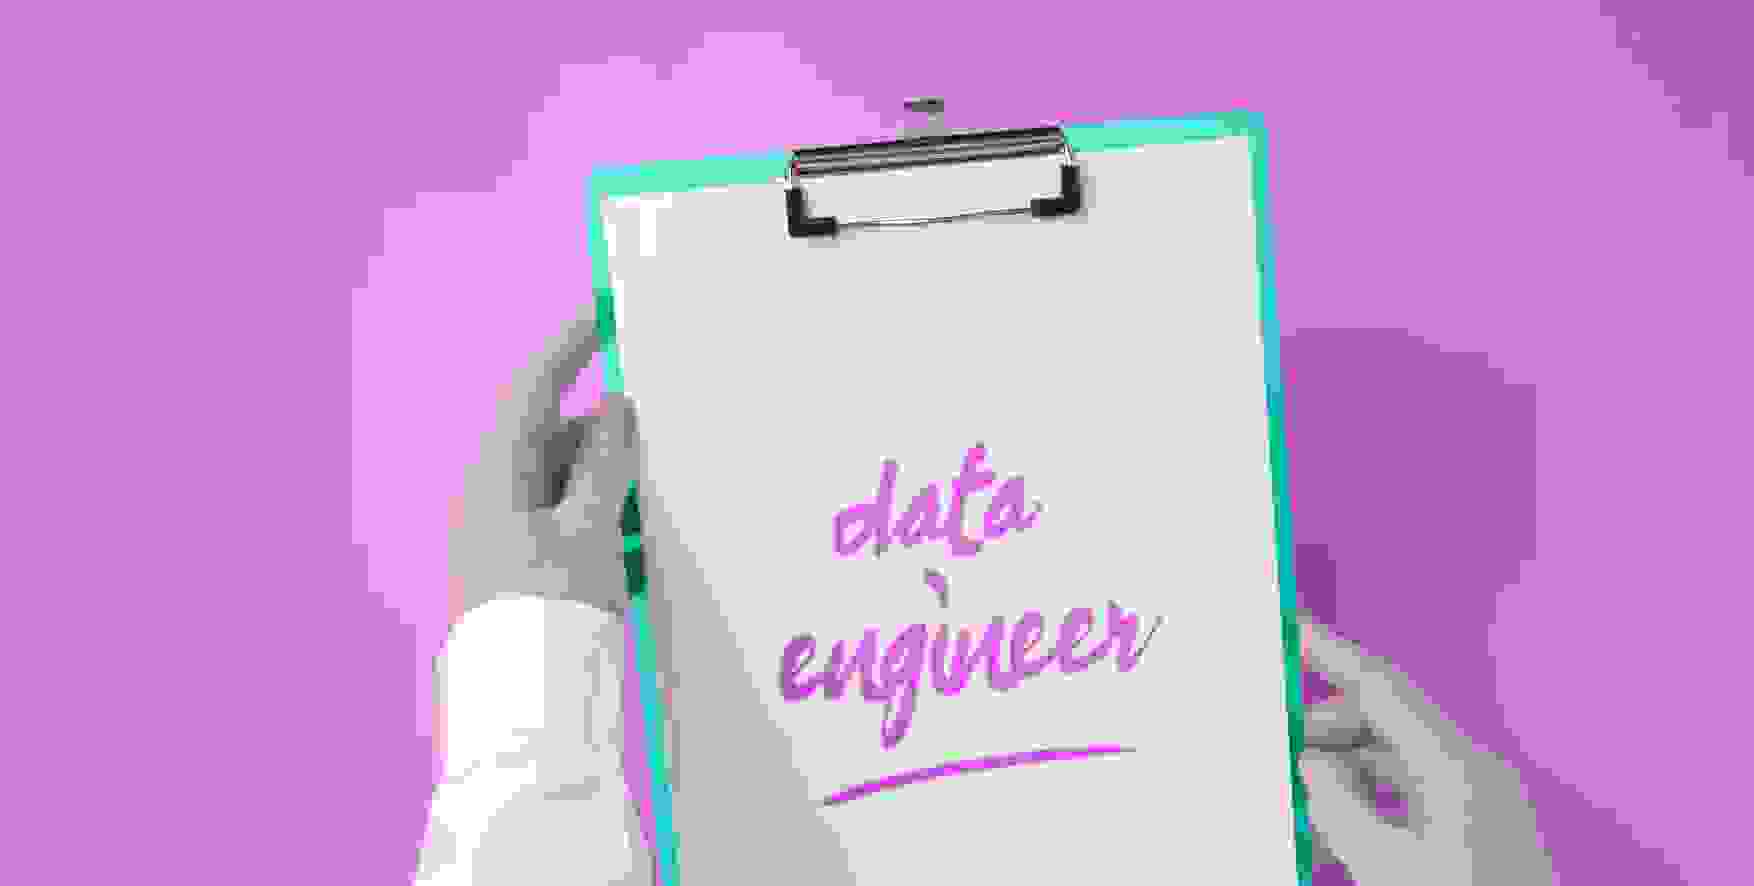 data engineer written on a piece of paper in a clipboard